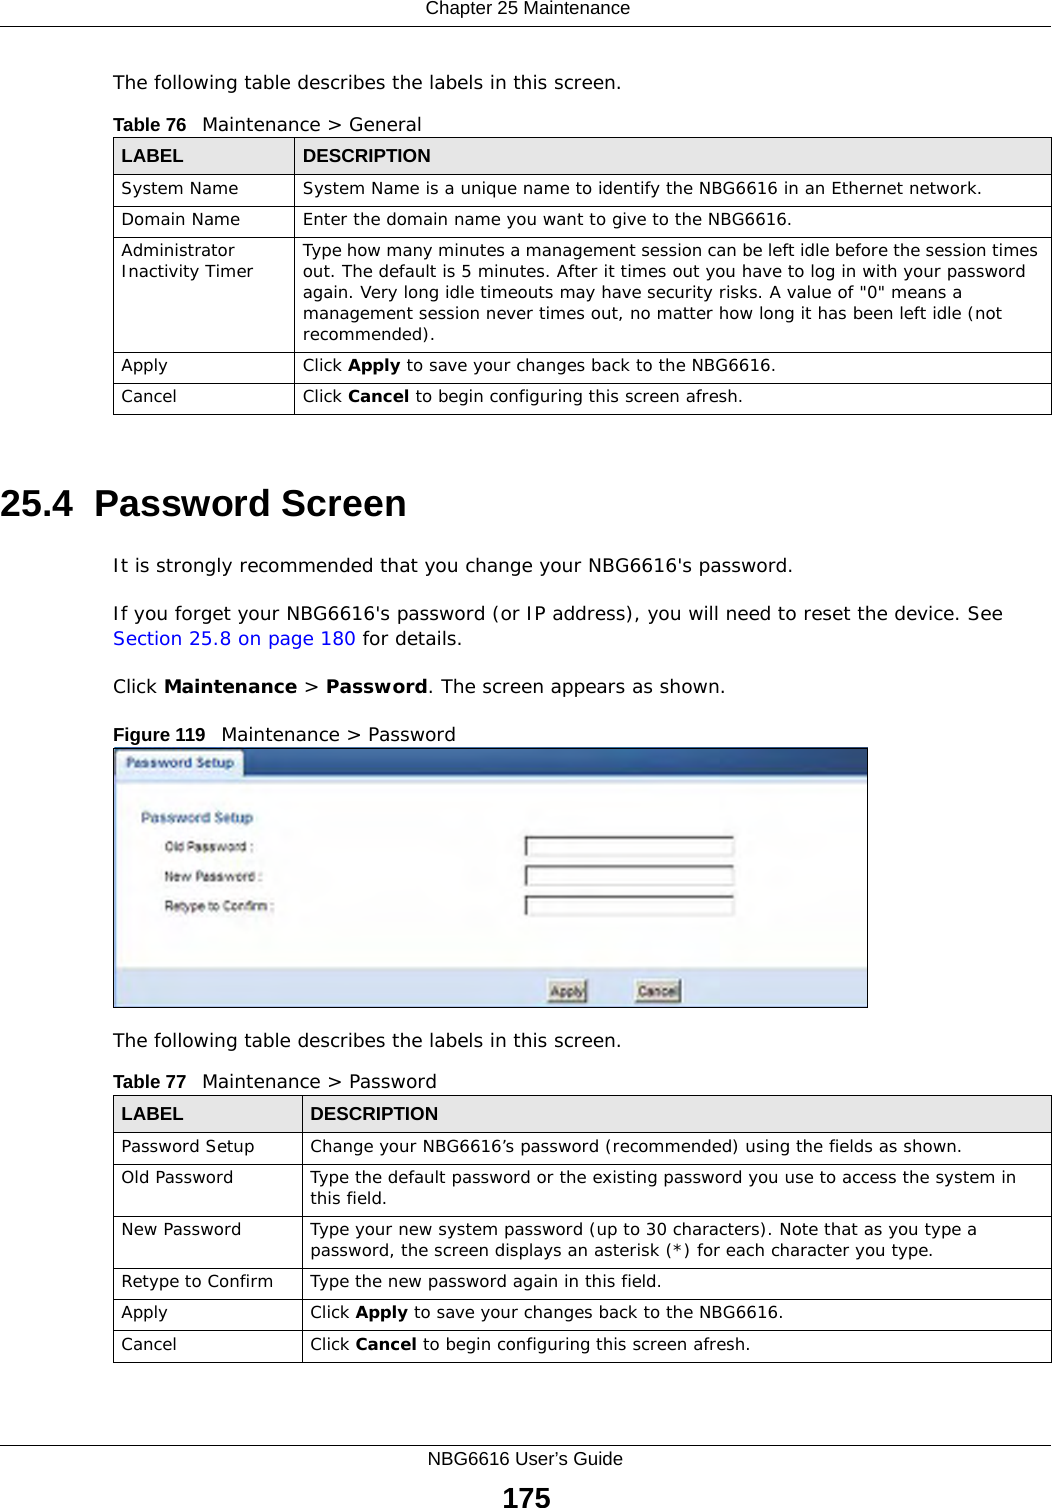  Chapter 25 MaintenanceNBG6616 User’s Guide175The following table describes the labels in this screen.25.4  Password ScreenIt is strongly recommended that you change your NBG6616&apos;s password. If you forget your NBG6616&apos;s password (or IP address), you will need to reset the device. See Section 25.8 on page 180 for details.Click Maintenance &gt; Password. The screen appears as shown.Figure 119   Maintenance &gt; Password The following table describes the labels in this screen.Table 76   Maintenance &gt; GeneralLABEL DESCRIPTIONSystem Name System Name is a unique name to identify the NBG6616 in an Ethernet network.Domain Name Enter the domain name you want to give to the NBG6616.Administrator Inactivity Timer Type how many minutes a management session can be left idle before the session times out. The default is 5 minutes. After it times out you have to log in with your password again. Very long idle timeouts may have security risks. A value of &quot;0&quot; means a management session never times out, no matter how long it has been left idle (not recommended).Apply Click Apply to save your changes back to the NBG6616.Cancel Click Cancel to begin configuring this screen afresh.Table 77   Maintenance &gt; PasswordLABEL DESCRIPTIONPassword Setup Change your NBG6616’s password (recommended) using the fields as shown.Old Password Type the default password or the existing password you use to access the system in this field.New Password Type your new system password (up to 30 characters). Note that as you type a password, the screen displays an asterisk (*) for each character you type.Retype to Confirm Type the new password again in this field.Apply Click Apply to save your changes back to the NBG6616.Cancel Click Cancel to begin configuring this screen afresh.